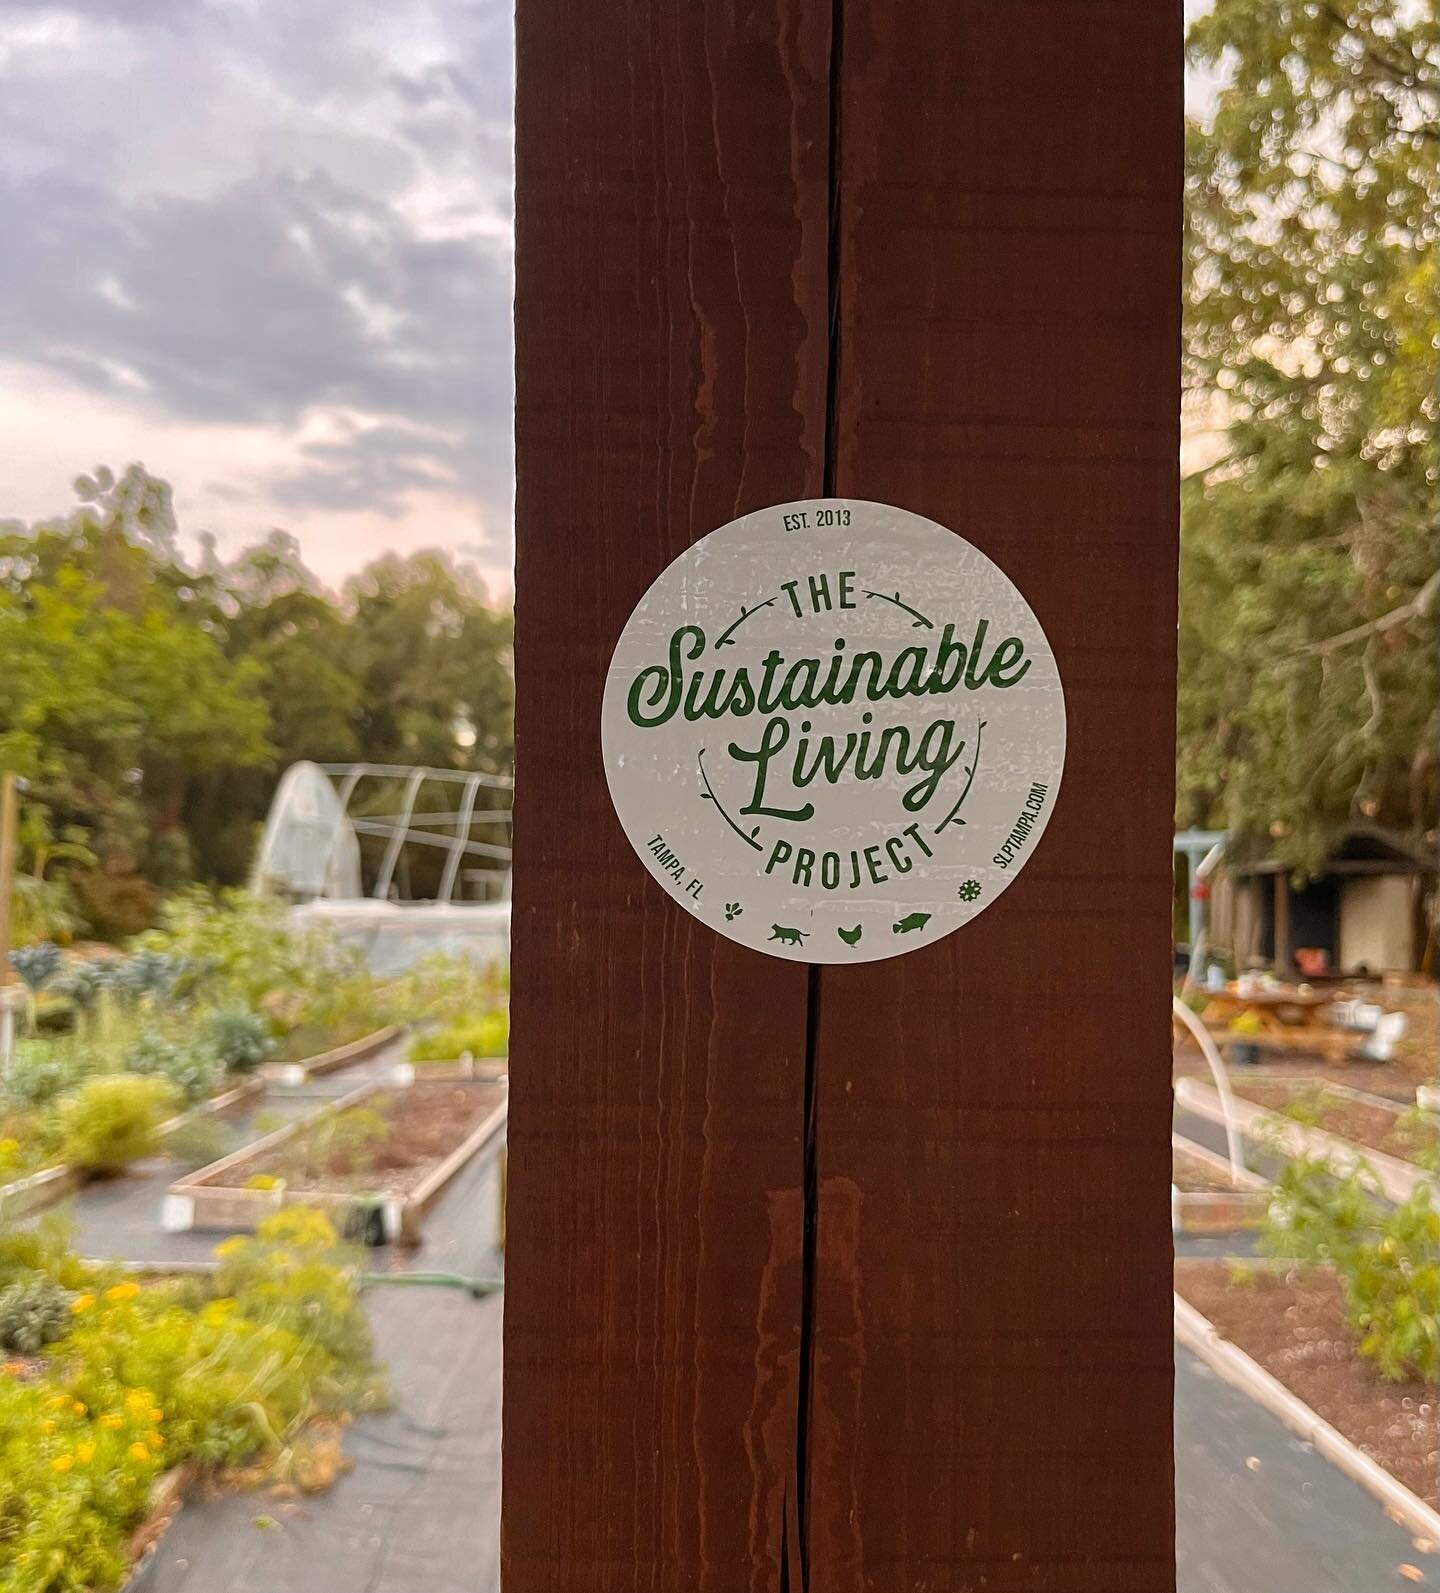 we&rsquo;re excited to share that our Sustainable Living Project stickers are finally live and available for purchase! 

Just in time for our ten year anniversary coming up this Earth day, all proceeds will go towards our greenhouse restoration proje